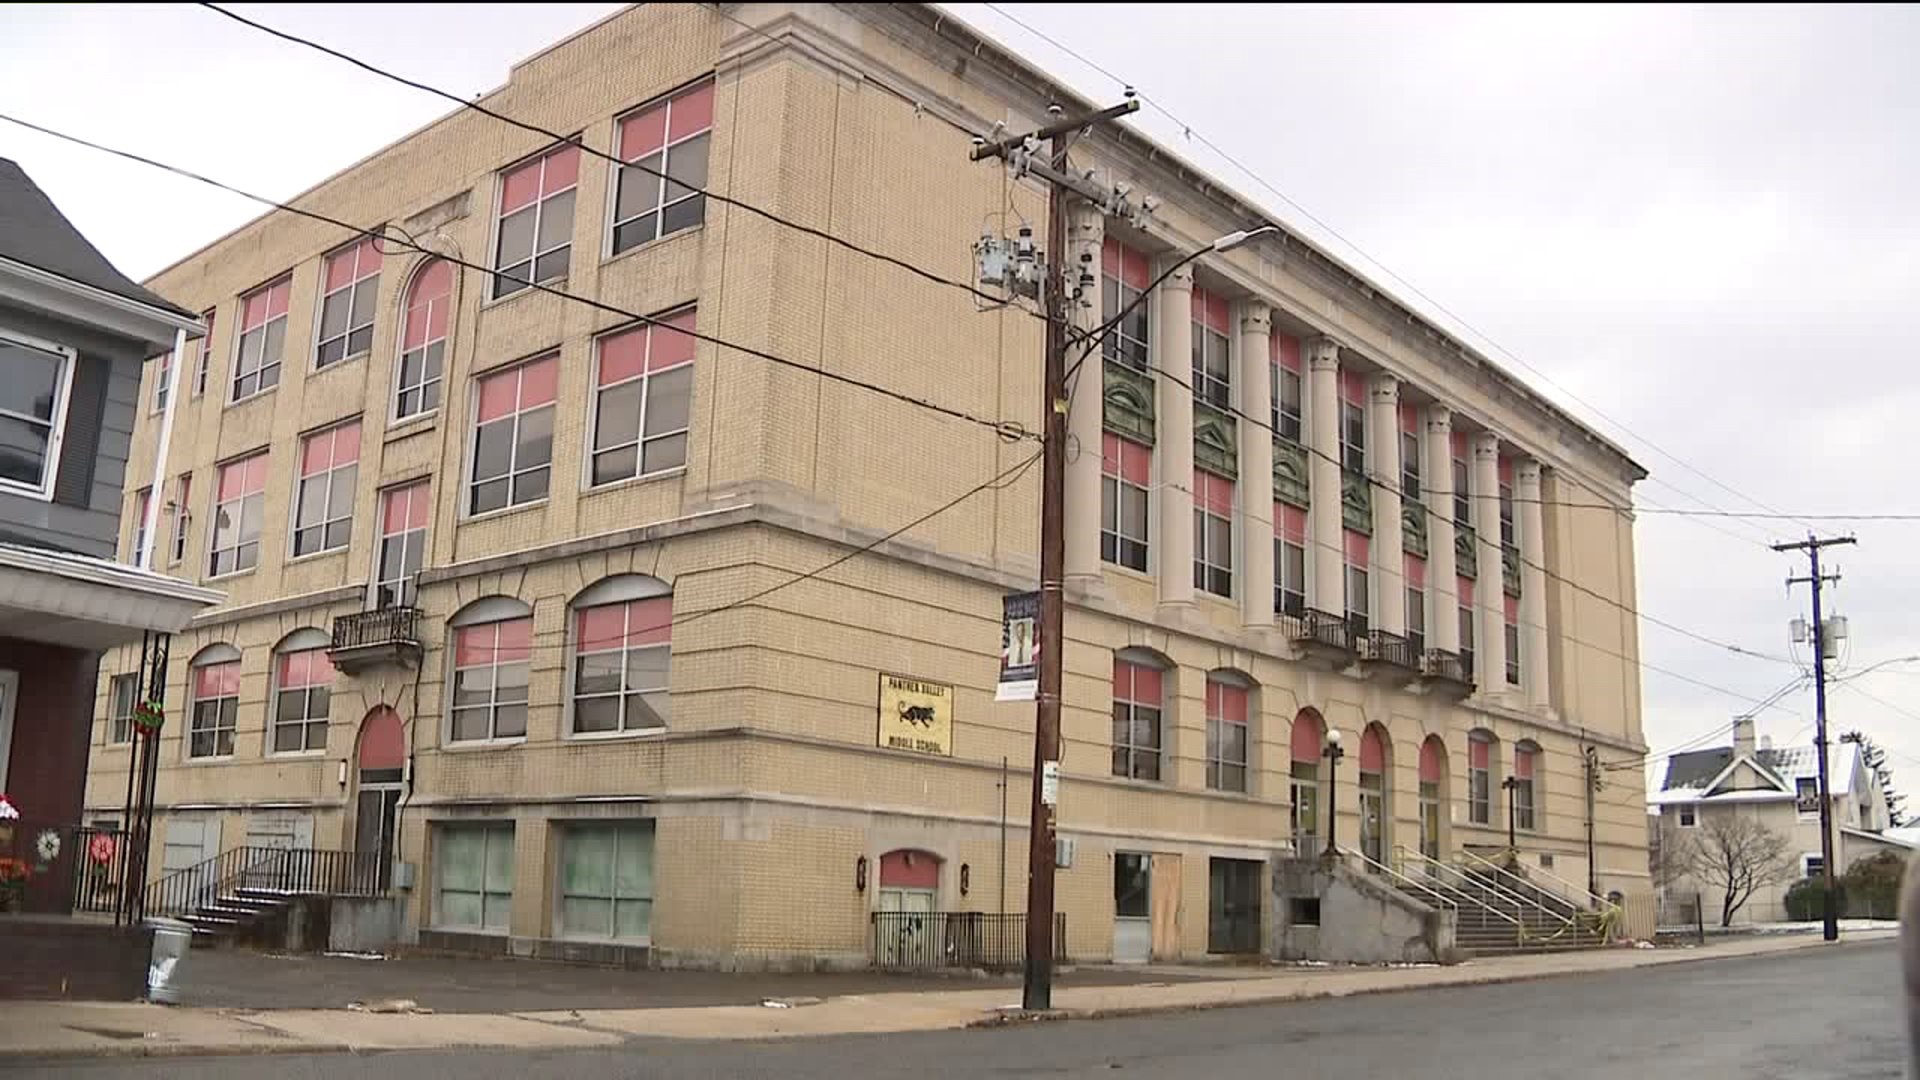 Plans for Renovation of Former Panther Valley Middle School